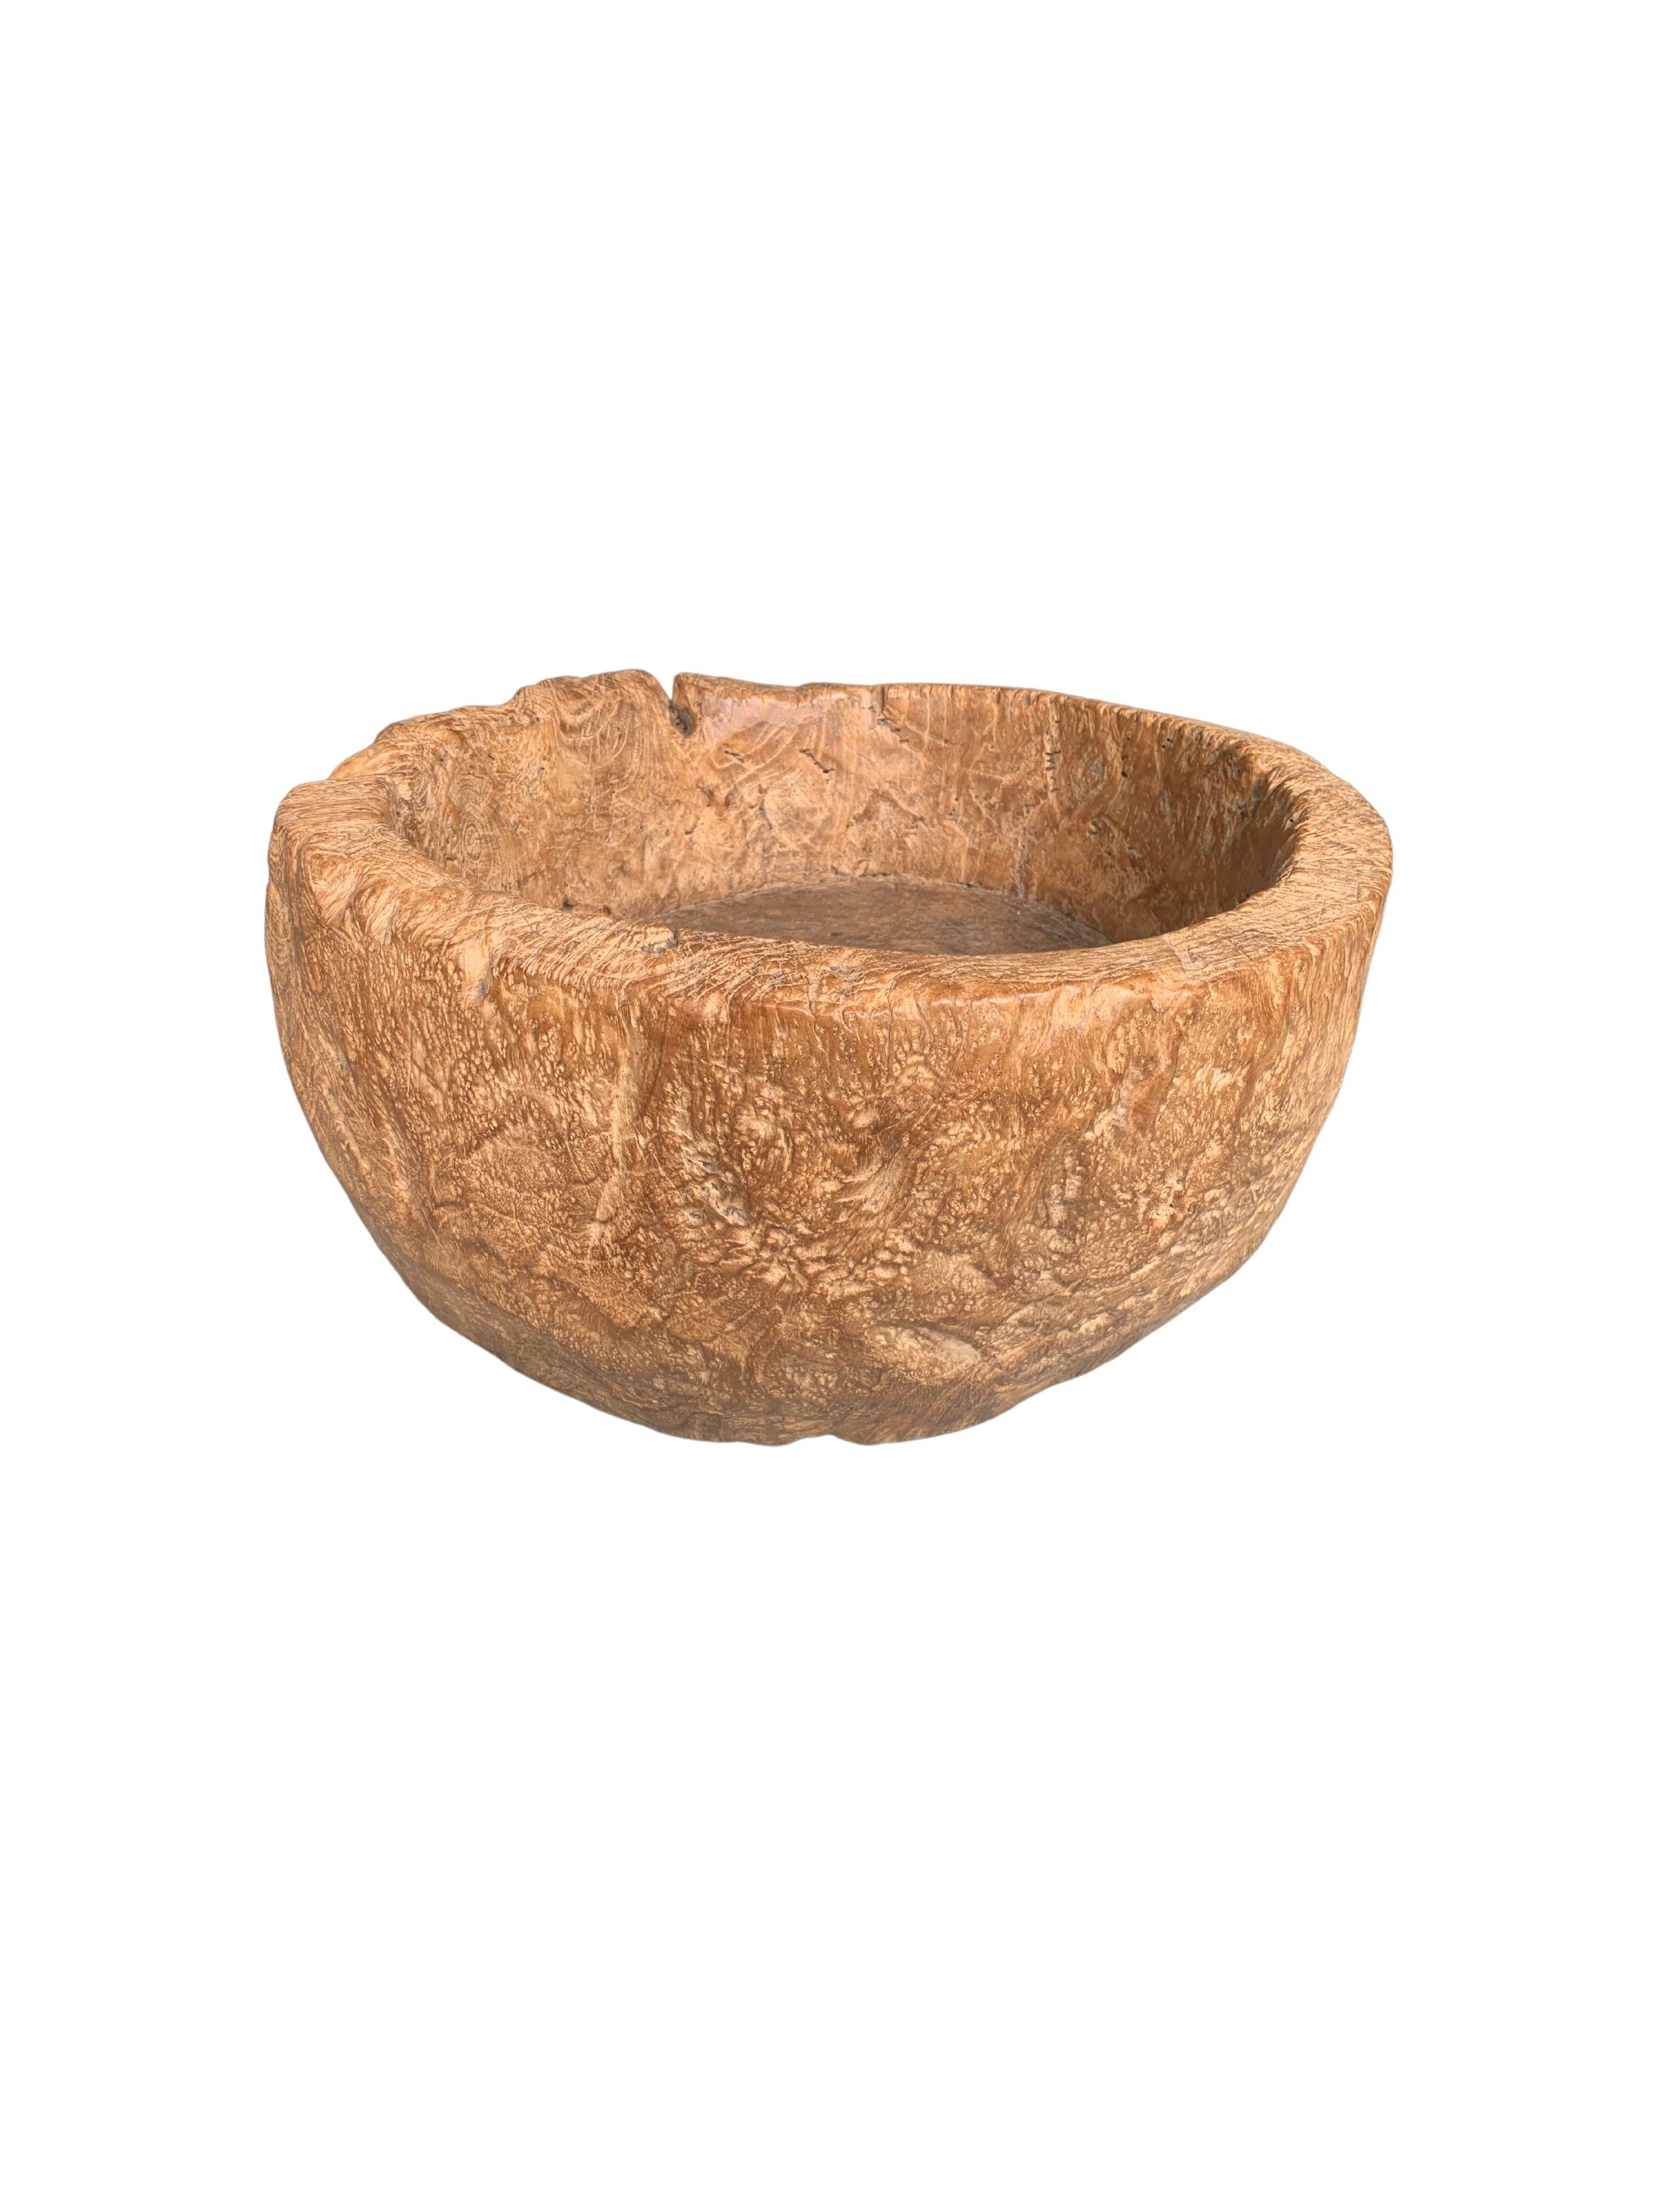 Vintage Solid Teak Wood Bowl from Java, Indonesia In Good Condition For Sale In Jimbaran, Bali